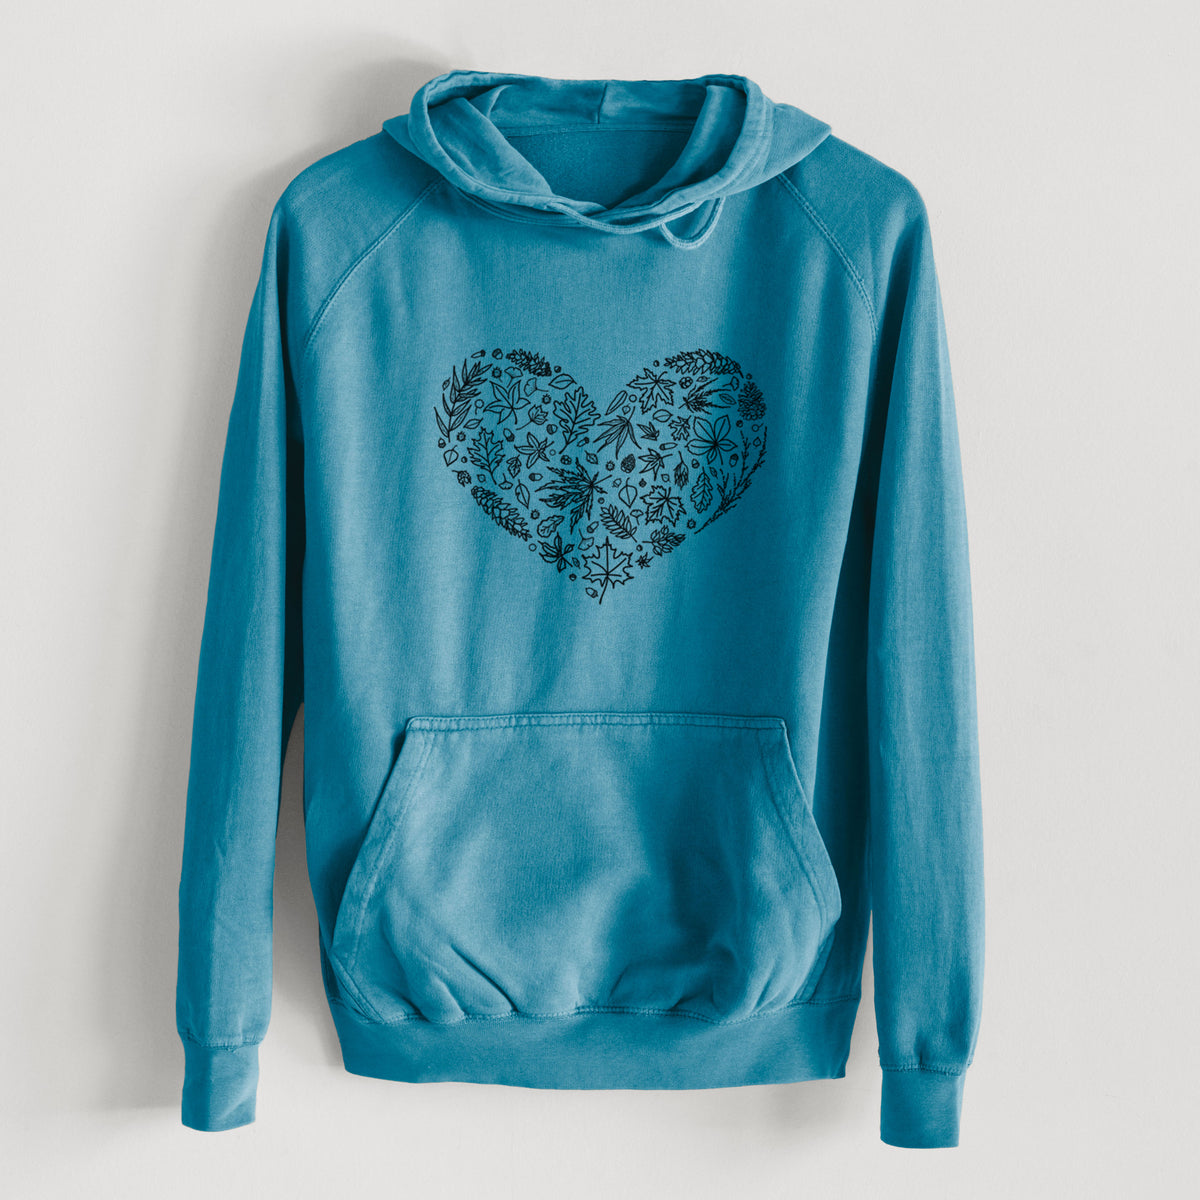 Heart Full of Autumn Leaves  - Mid-Weight Unisex Vintage 100% Cotton Hoodie